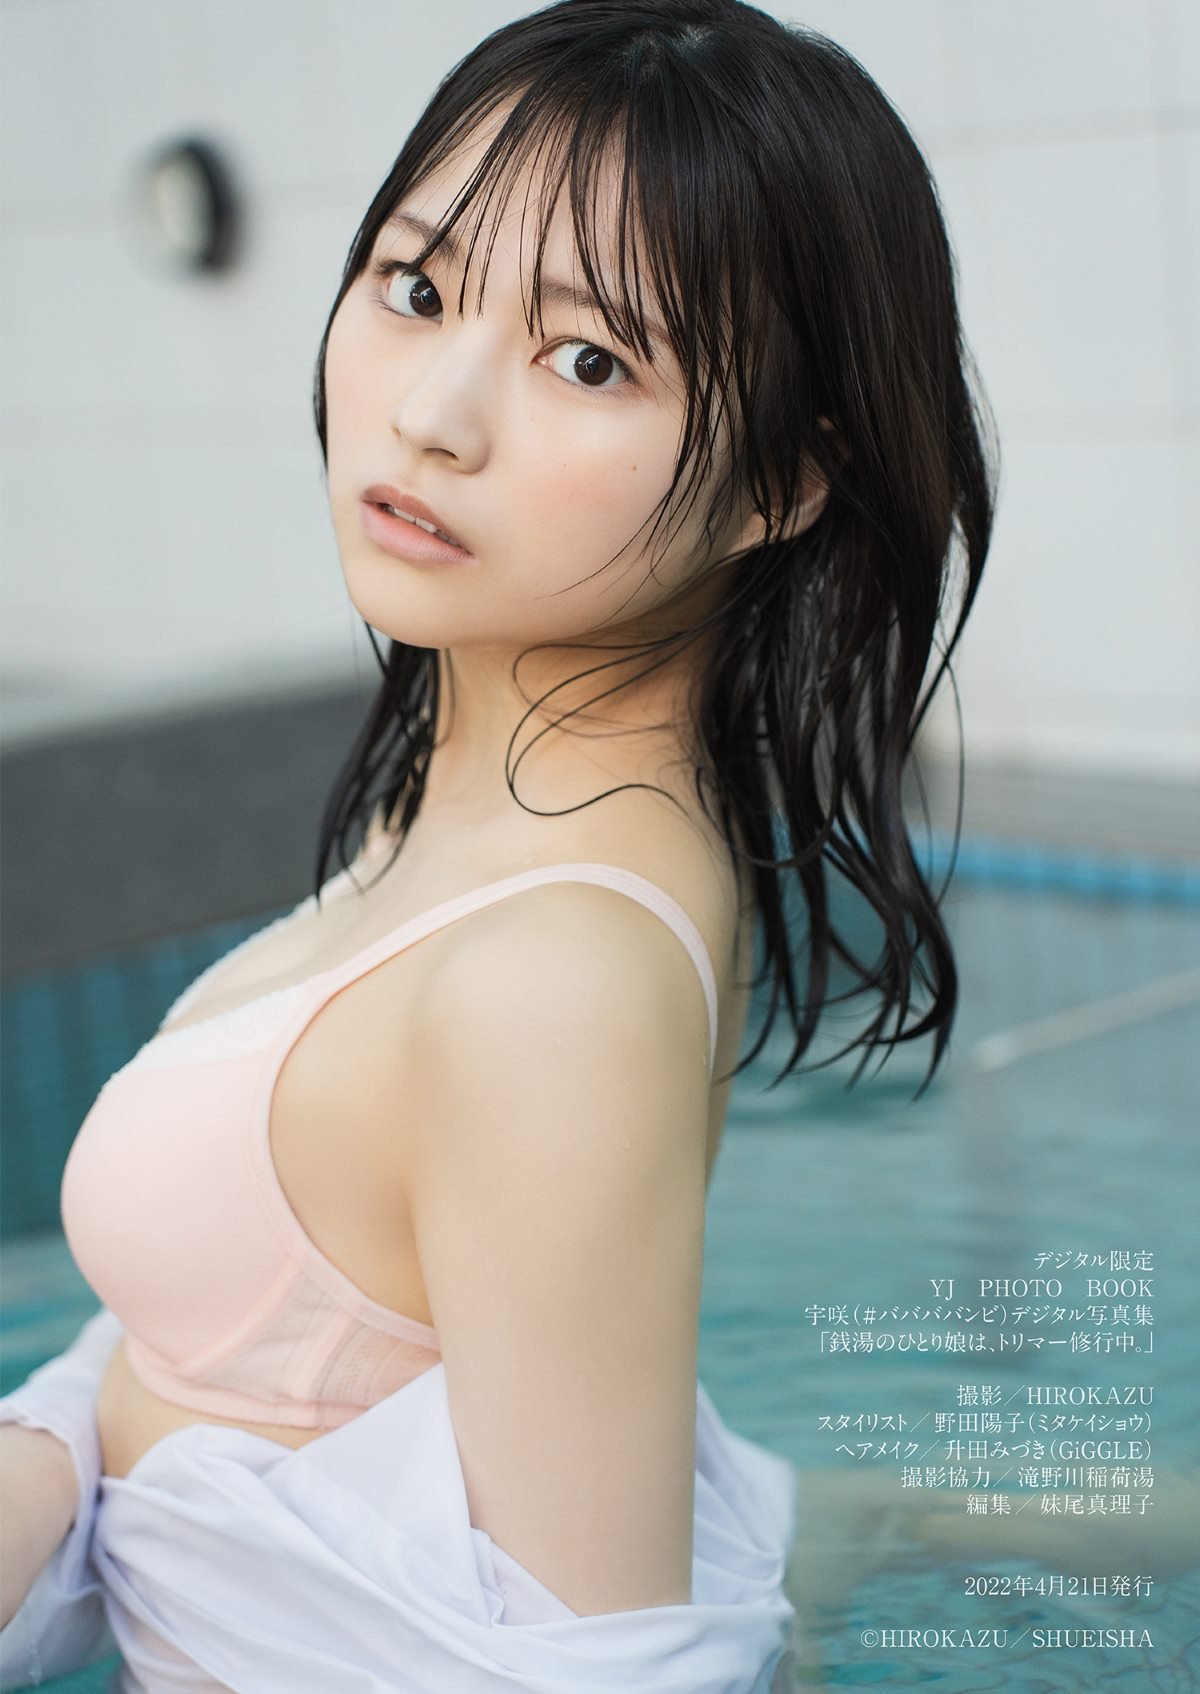 YJ Photobook Usa 宇咲 The only daughter of a public bath is training as a trimmer 銭湯のひとり娘は、トリマー修行中 2022 04 21 0045 1914712880.jpg